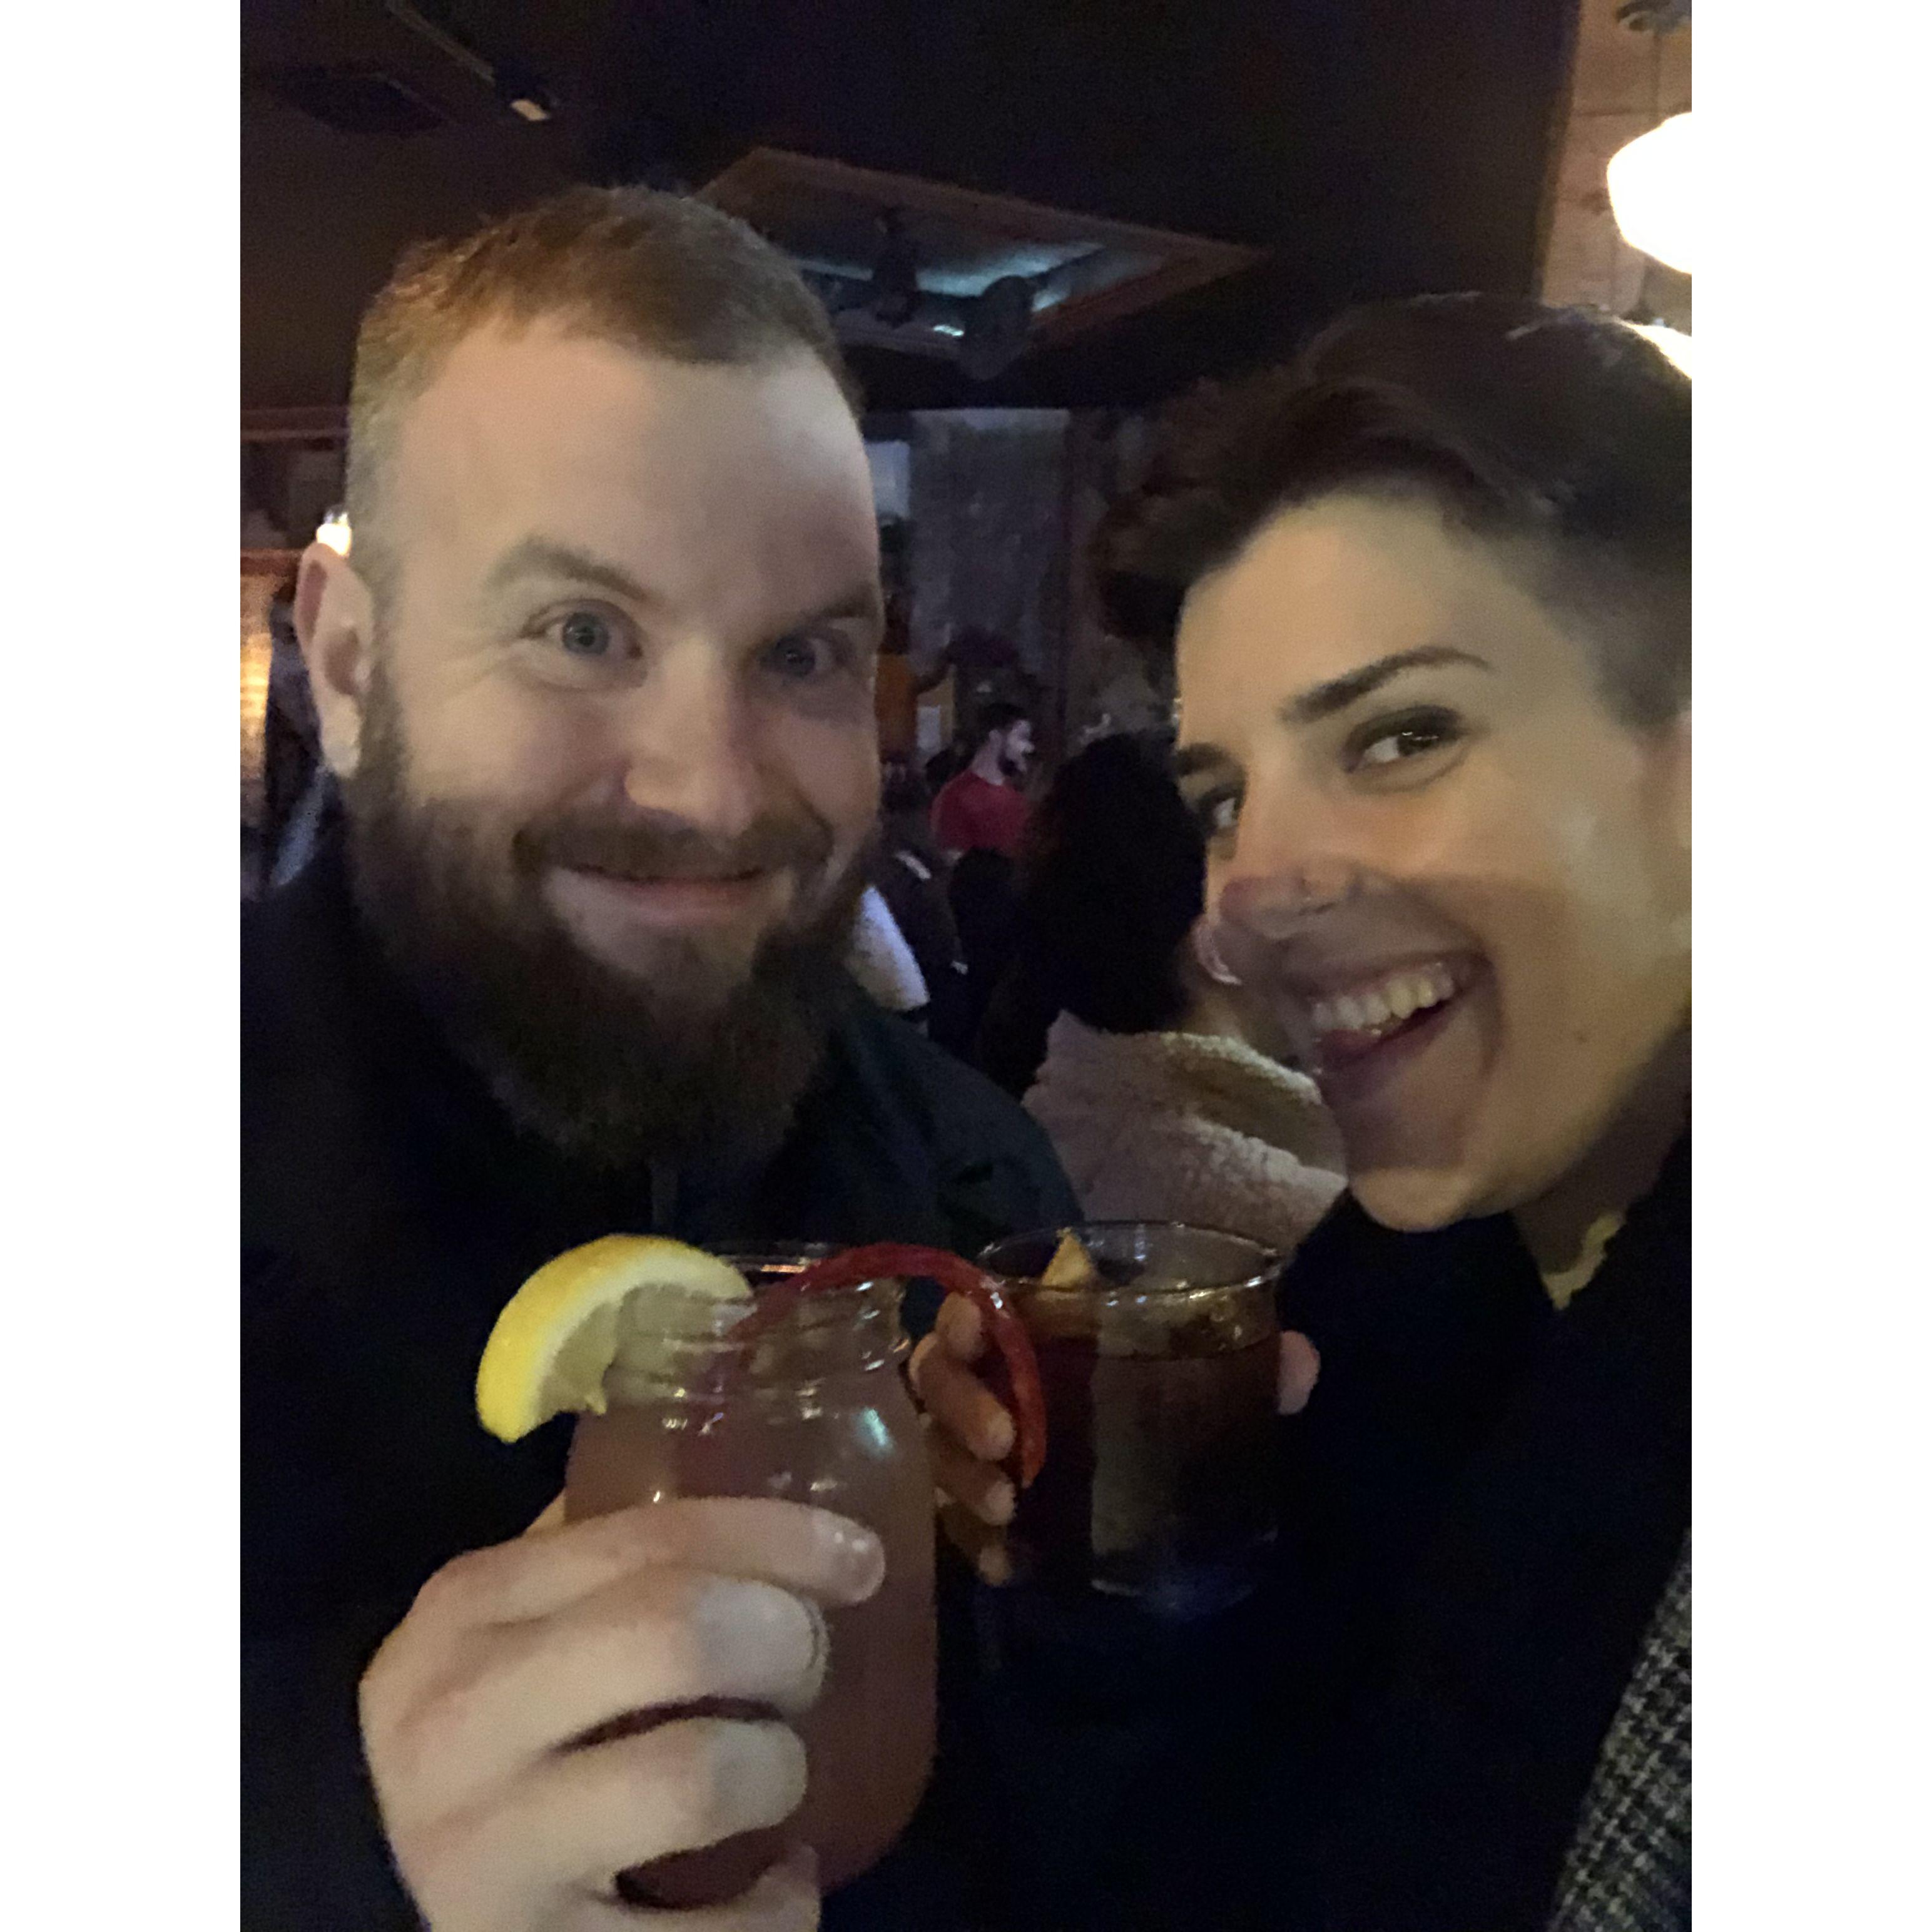 Our first time bar hopping pre-pandemic. Why yes, that is at Twizzler sticking out of Will’s drink (says a lot about what he likes to drink).